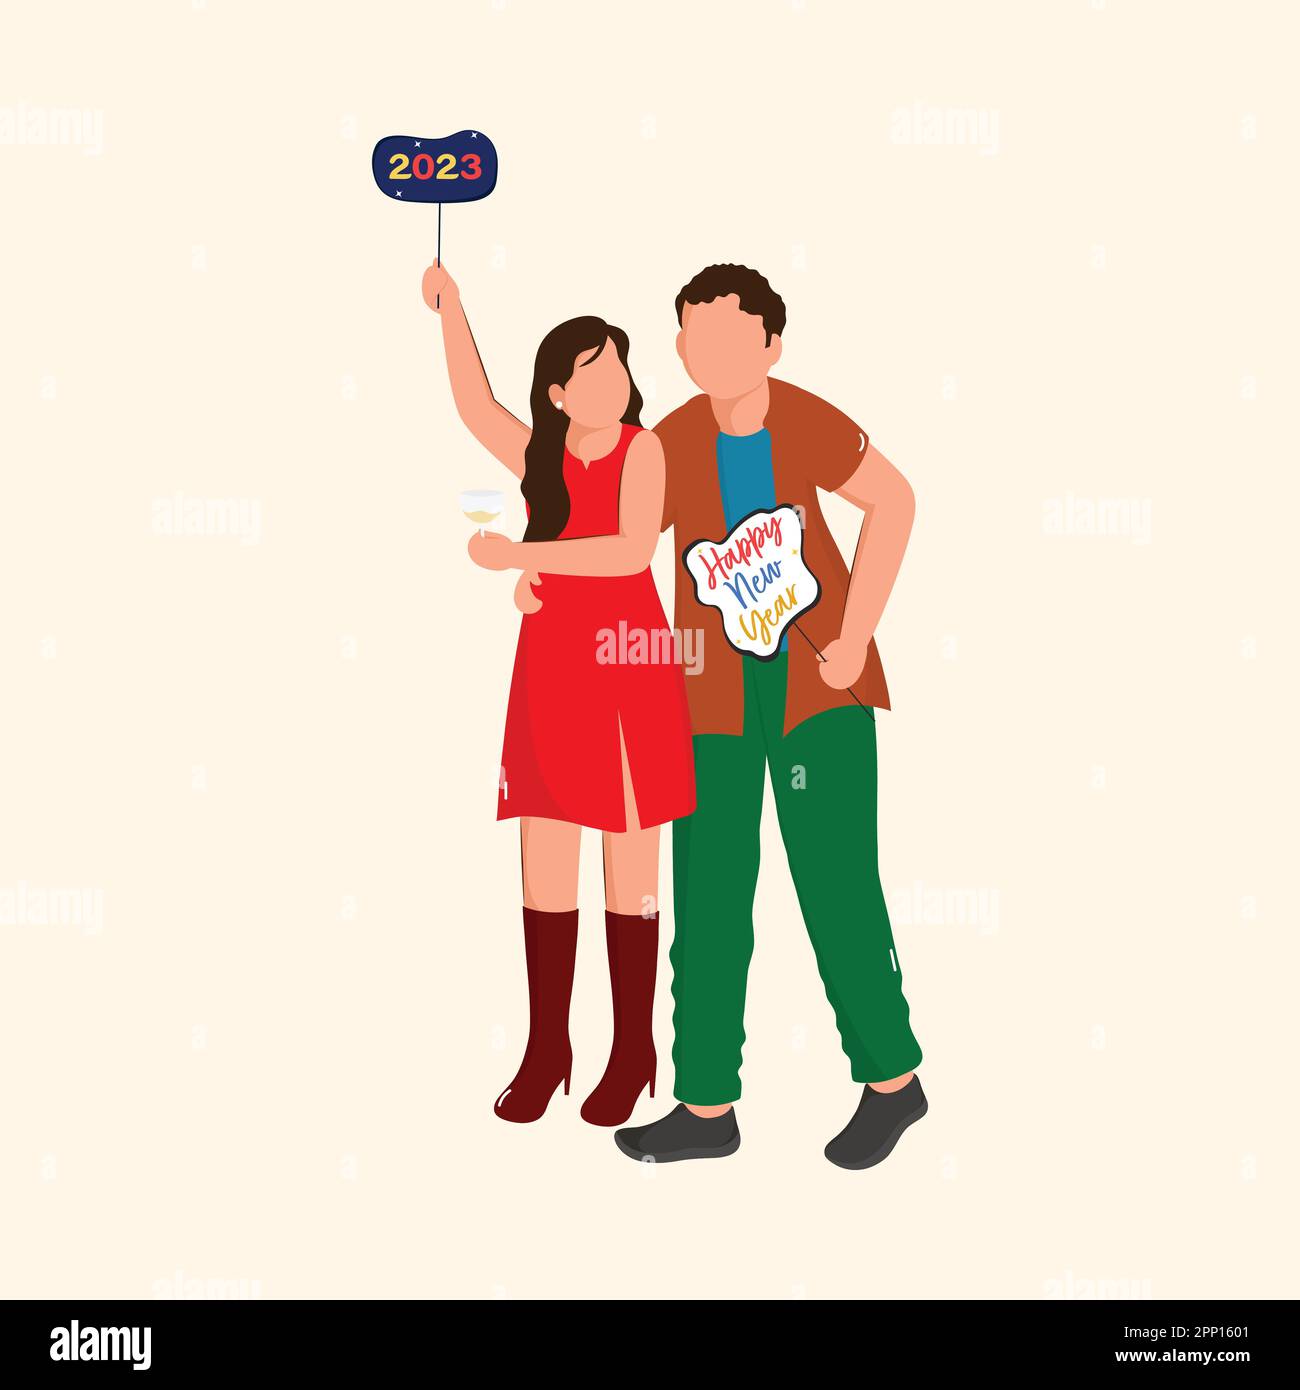 Faceless Young Couple Holding Their Placards Of 2023 Happy New Year Message On Cosmic Latte Background. Stock Vector